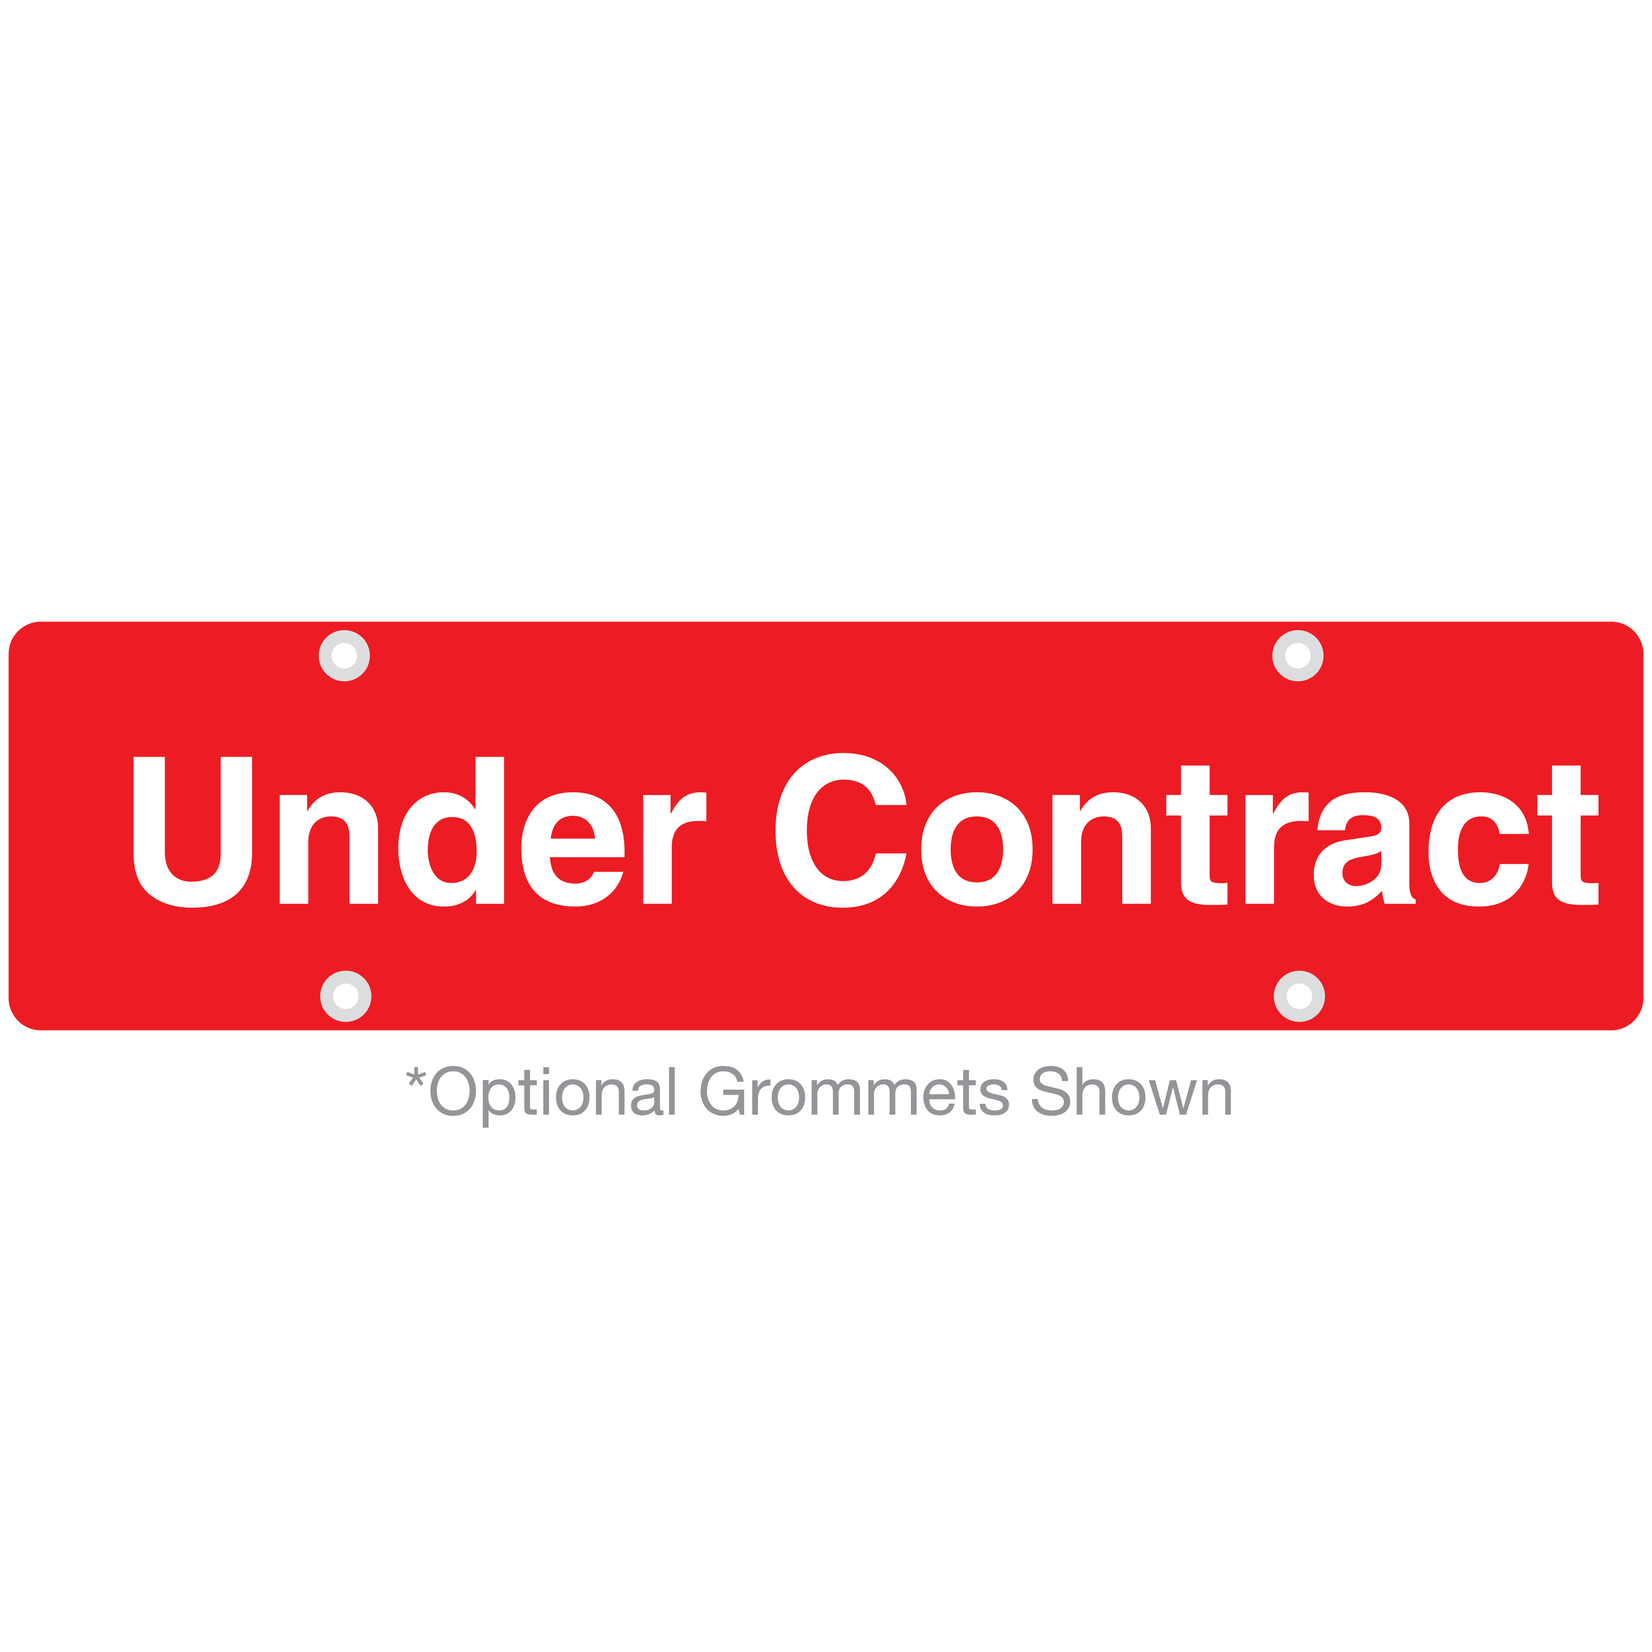 Under Contract RIDER